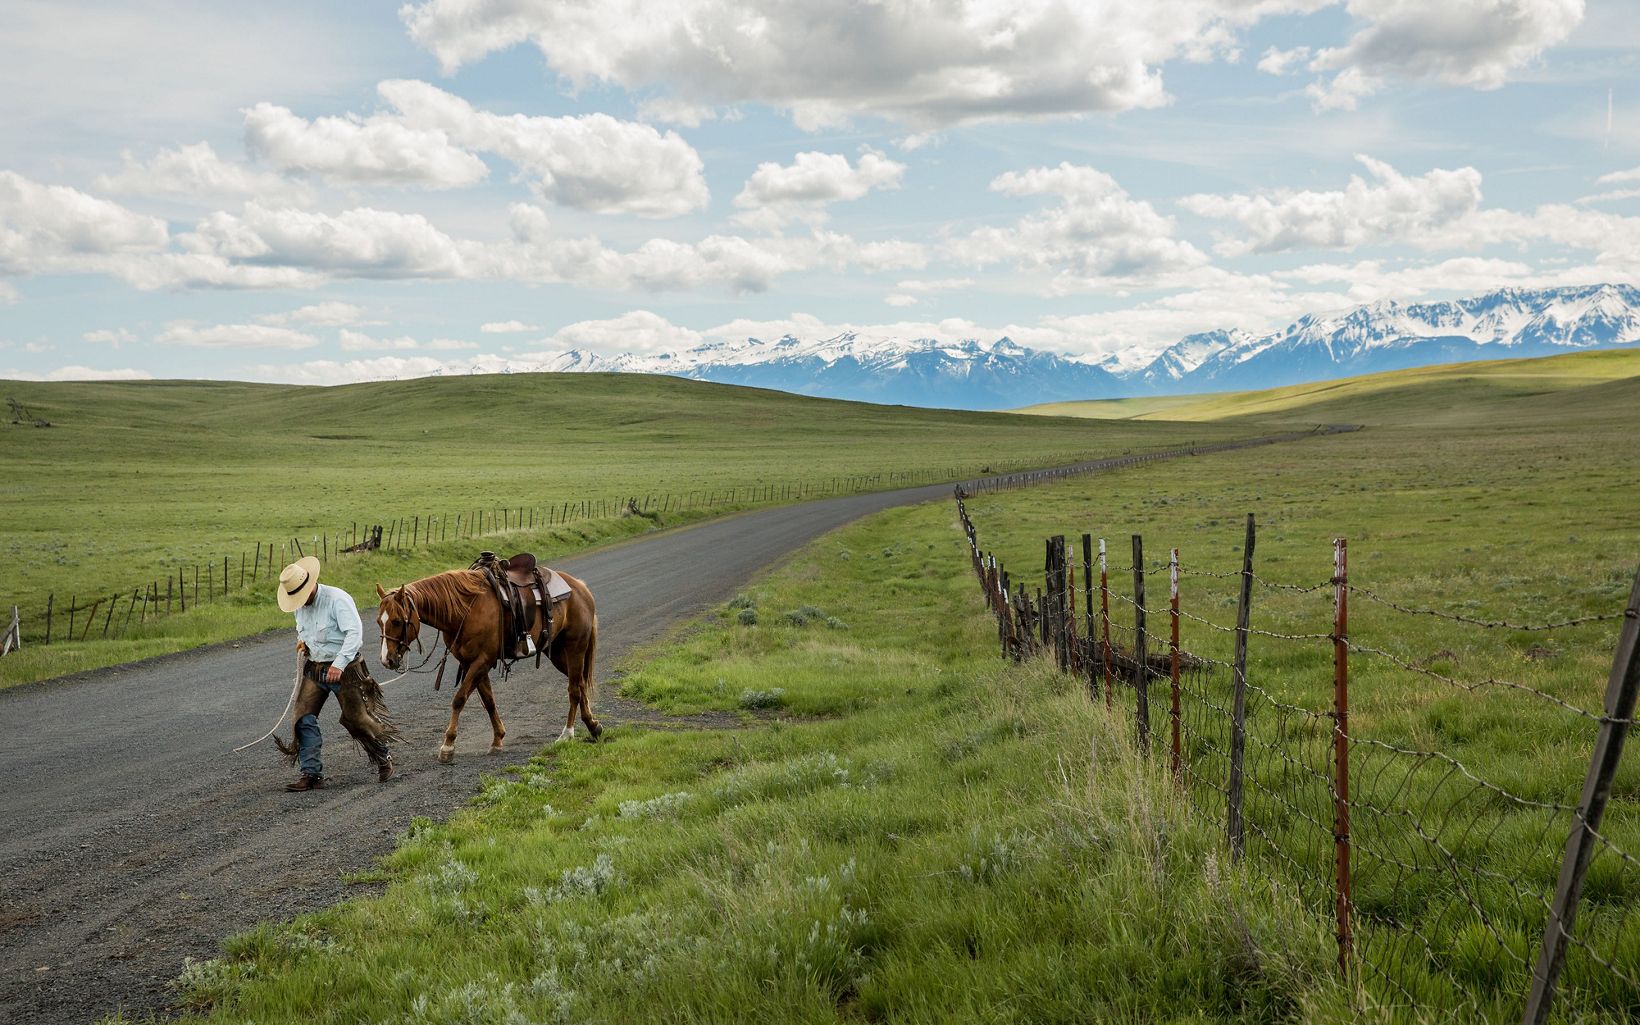 A man in a cowboy hat walks in front of a horse along a dirt road that cuts through a large, green, grassy prairie, with a mountain range in the background.